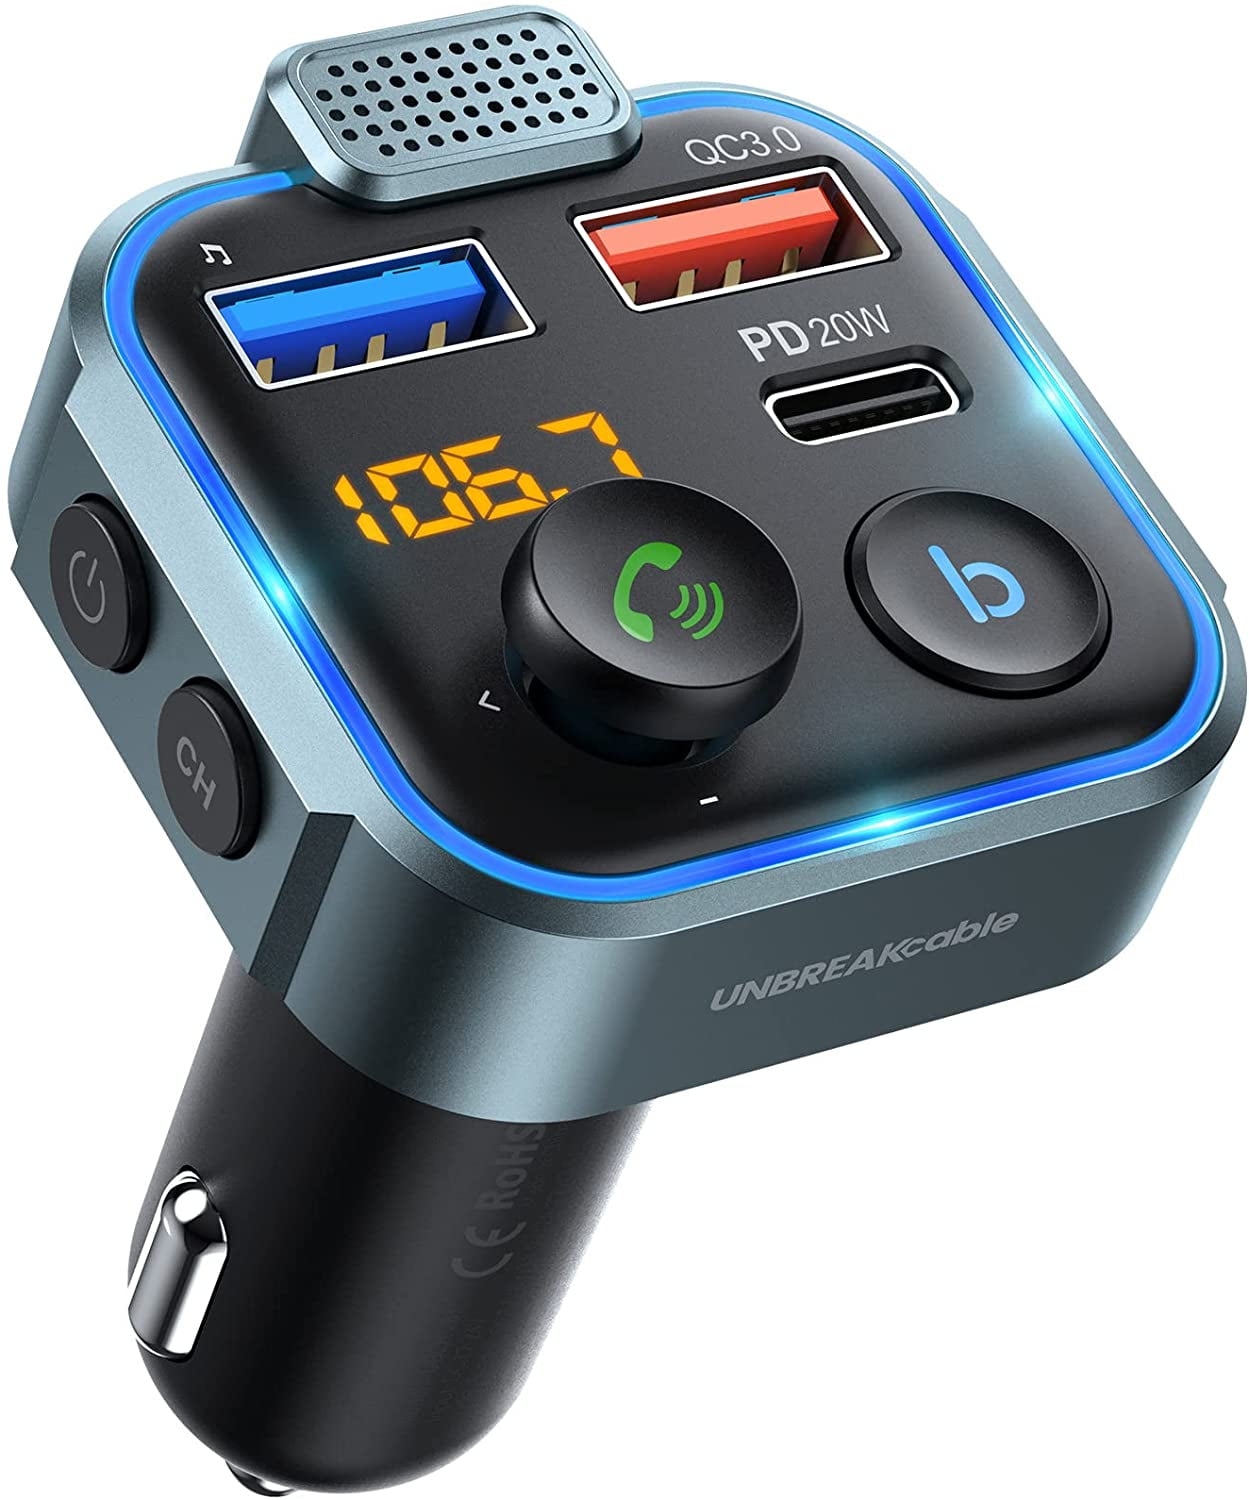 UNBREAKcable Bluetooth 5.0 FM Transmitter for [PD 20W + QC 3.0] [Stronger Microphone & HiFi Bass Sound] Cigarette Lighter Radio Music Adapter Charger, Supports Siri Google Assistant - Walmart.com